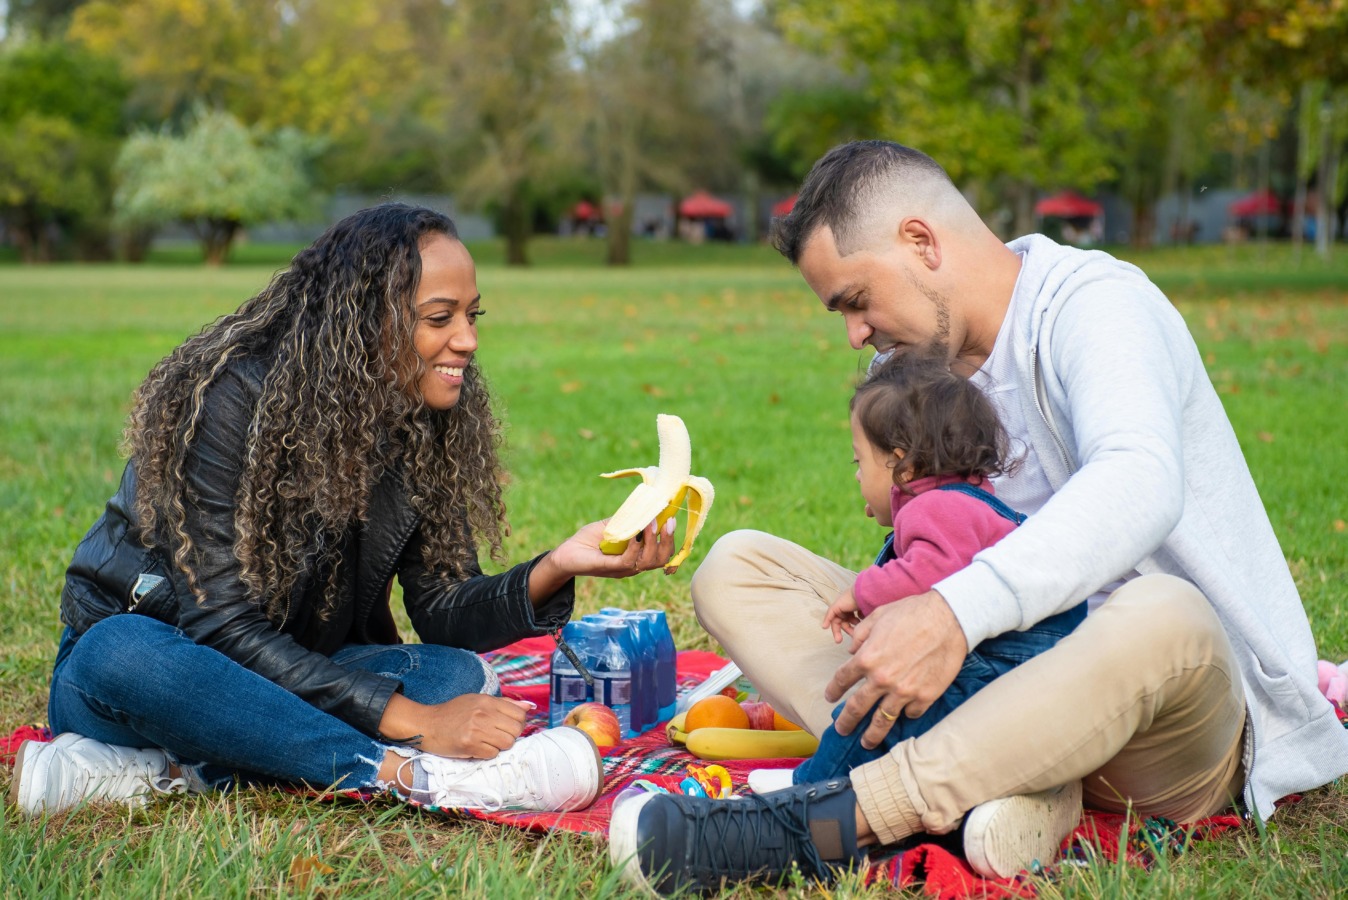 Two parents sat with child on the grass. The mother is feeding the child a banana,